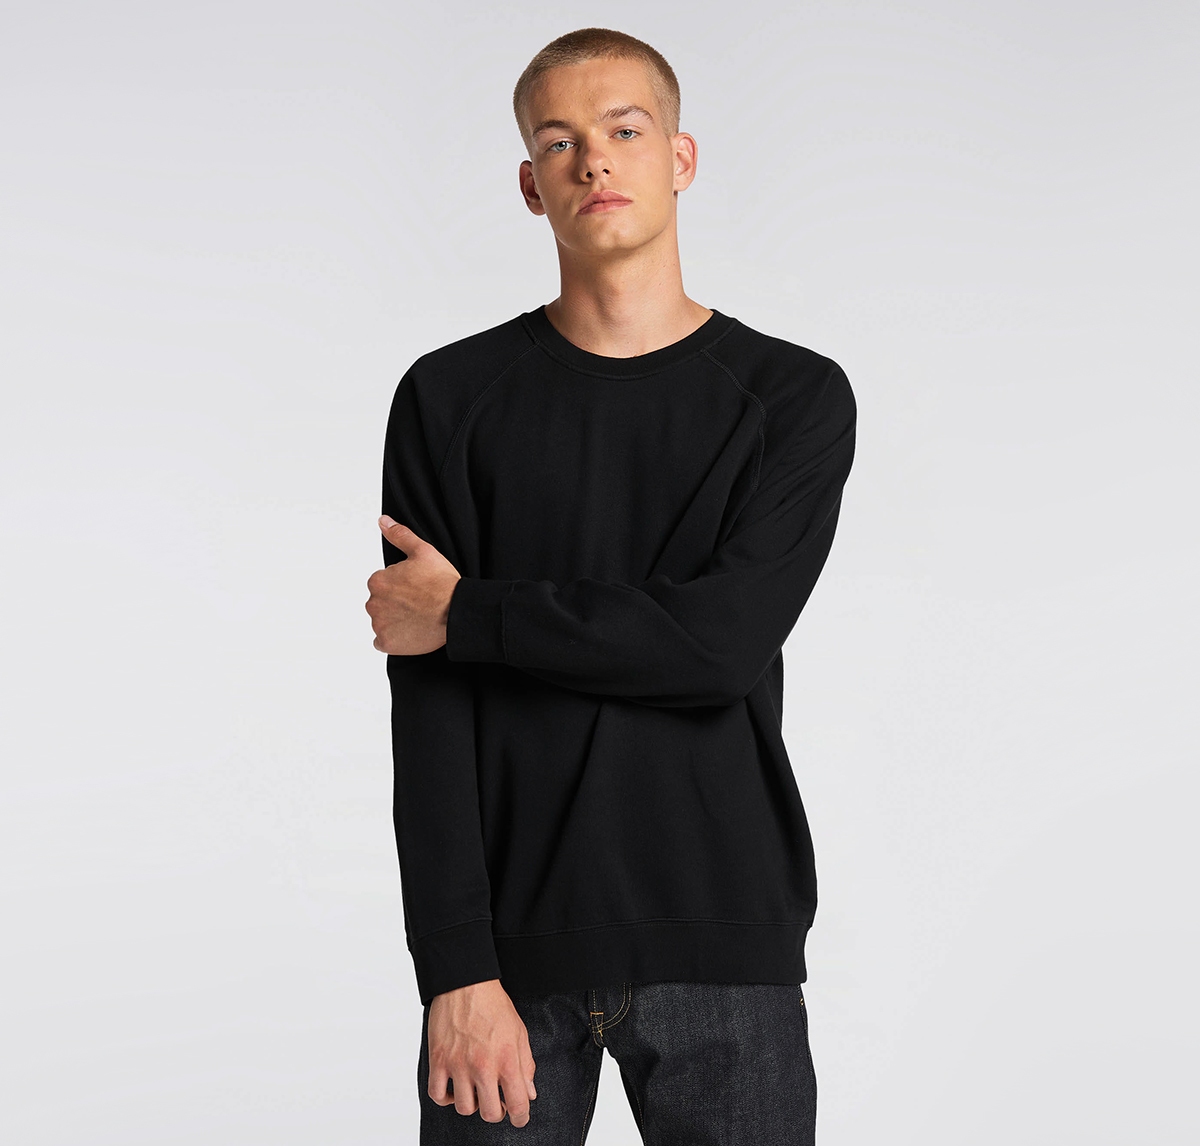 EDWIN x TEIDE - Panther Sweater - Black front